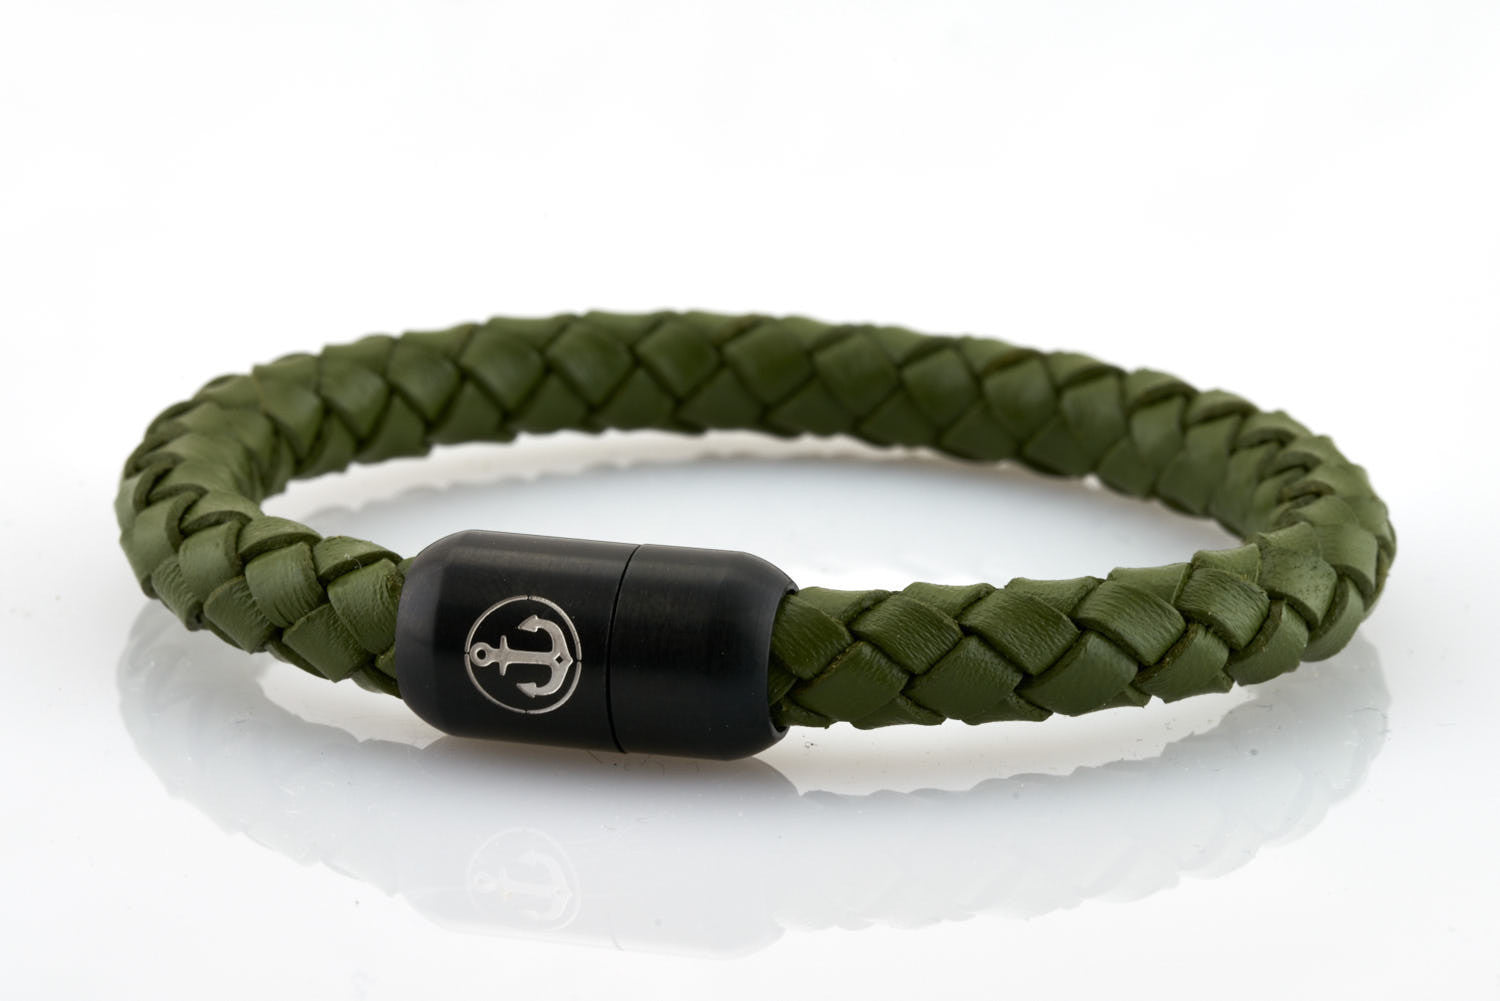 Thick olive green leather bracelet for men with black stainless steel clasp with anchor engraving - NEPTN